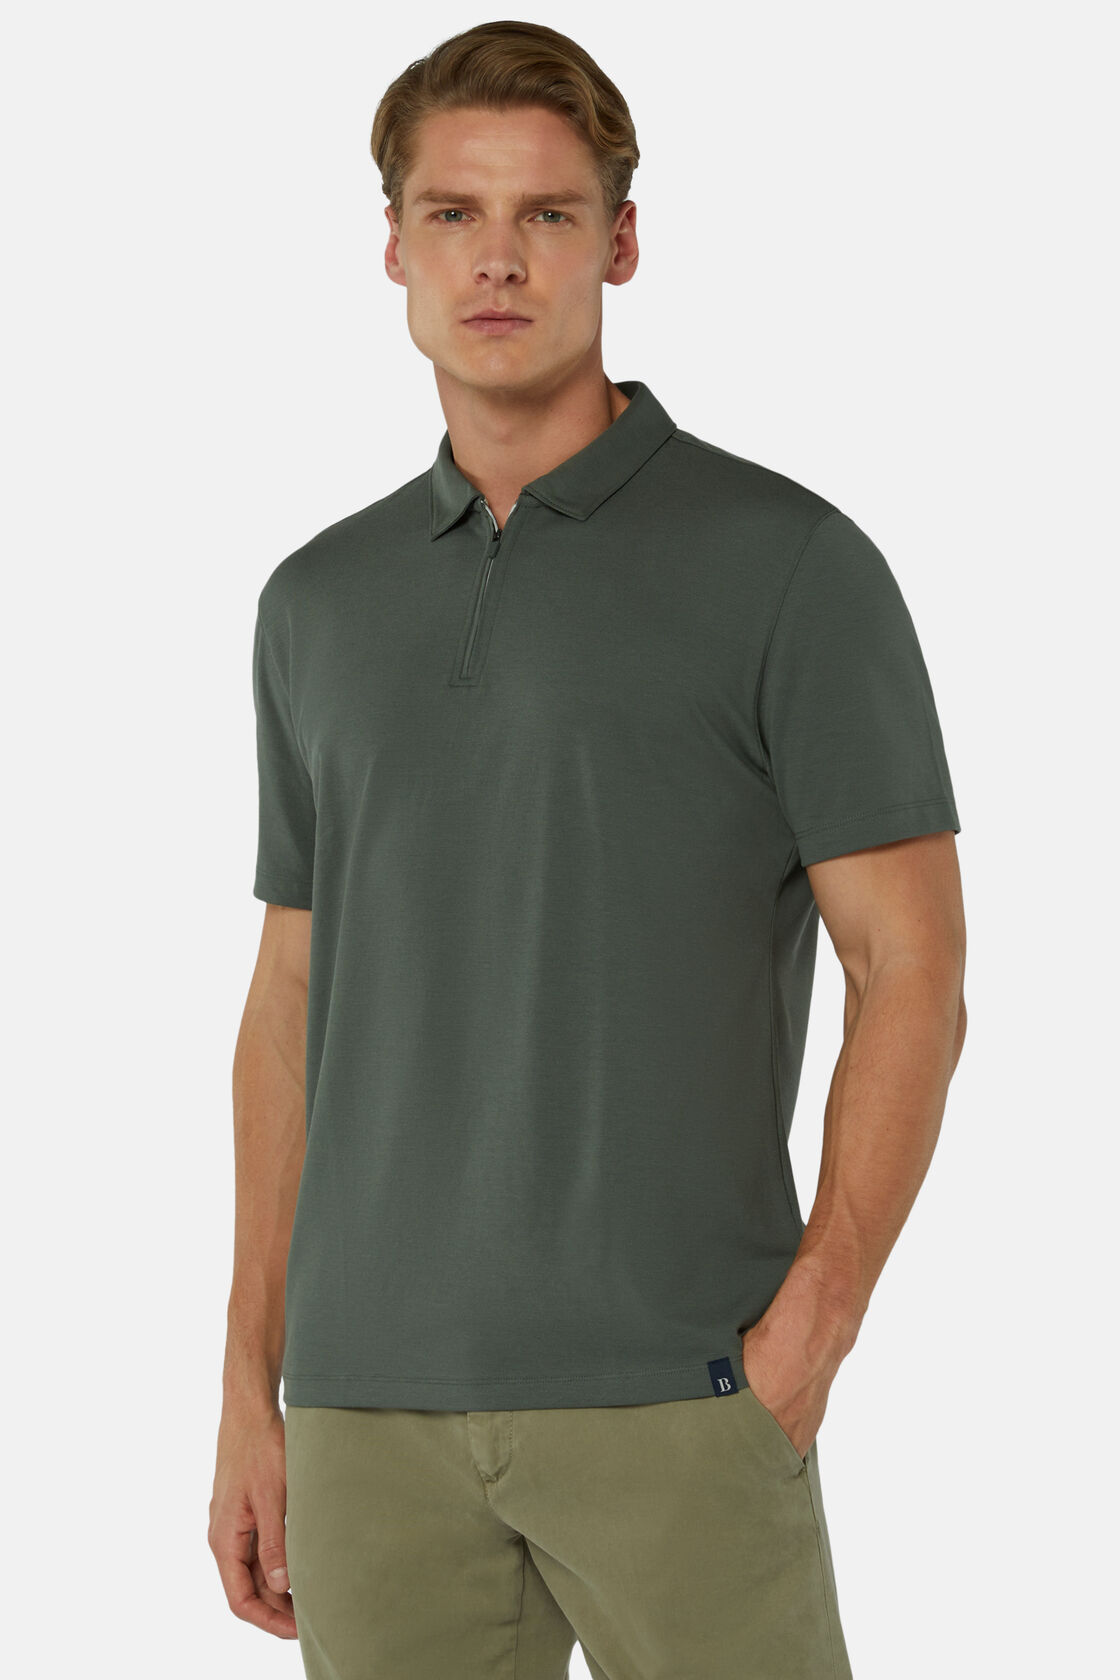 Polo in sustainable performance pique, Military Green, hi-res